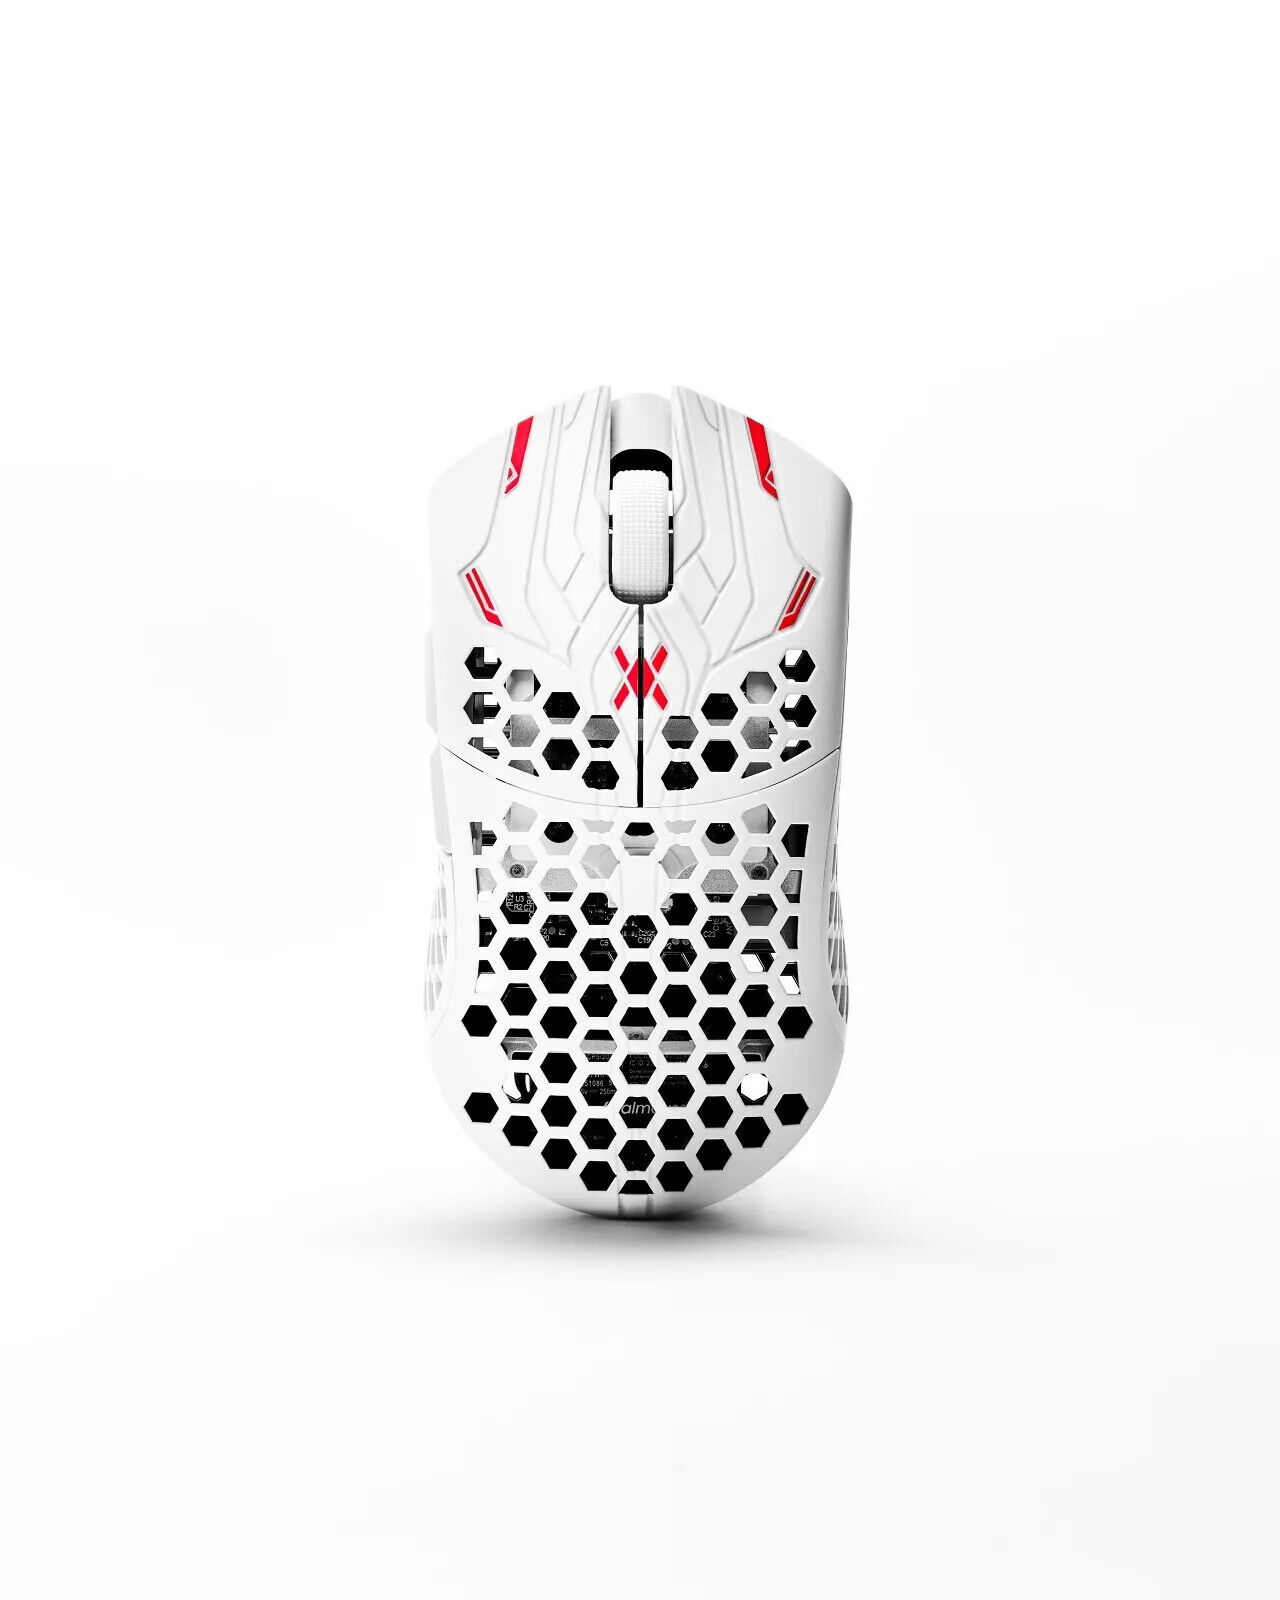 Finalmouse Ultralight X Pro Series | aceu | ALL SIZES PRESALE 🔥CONFIRMED🔥